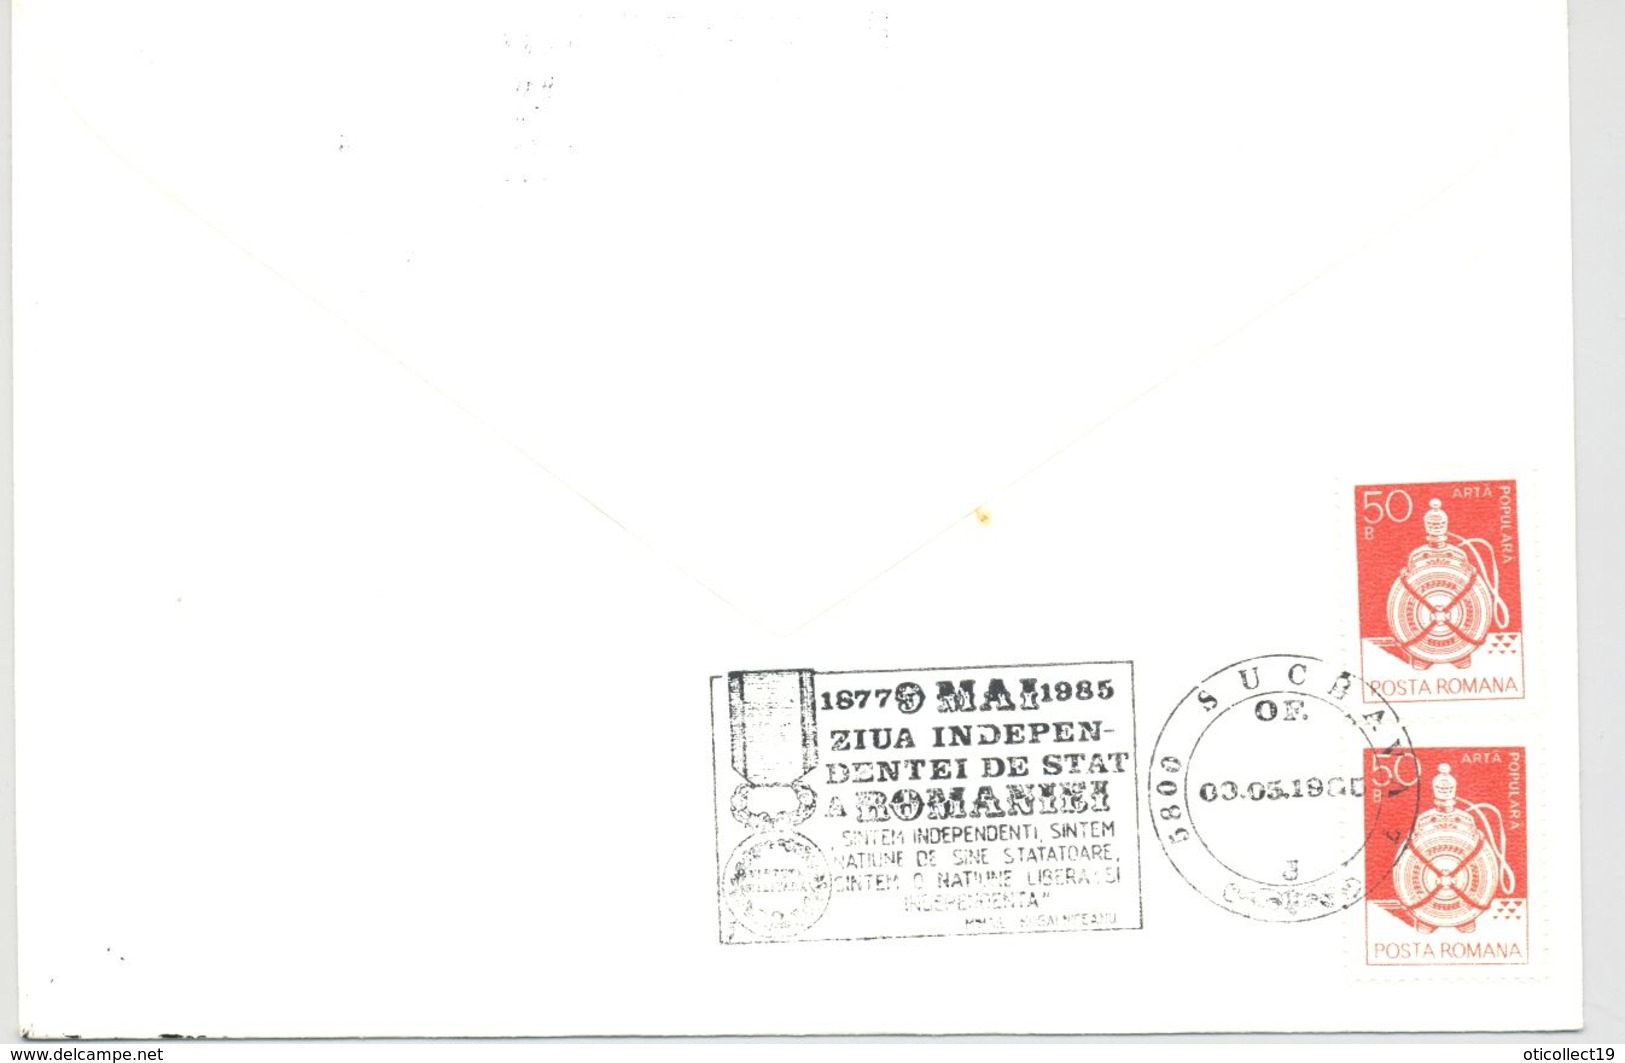 ROMANIAN STATE INDEPENDENCE ANNIVERSARY, SPECIAL POSTMARK ON COVER, POTTERY STAMP, 1985, ROMANIA - Covers & Documents